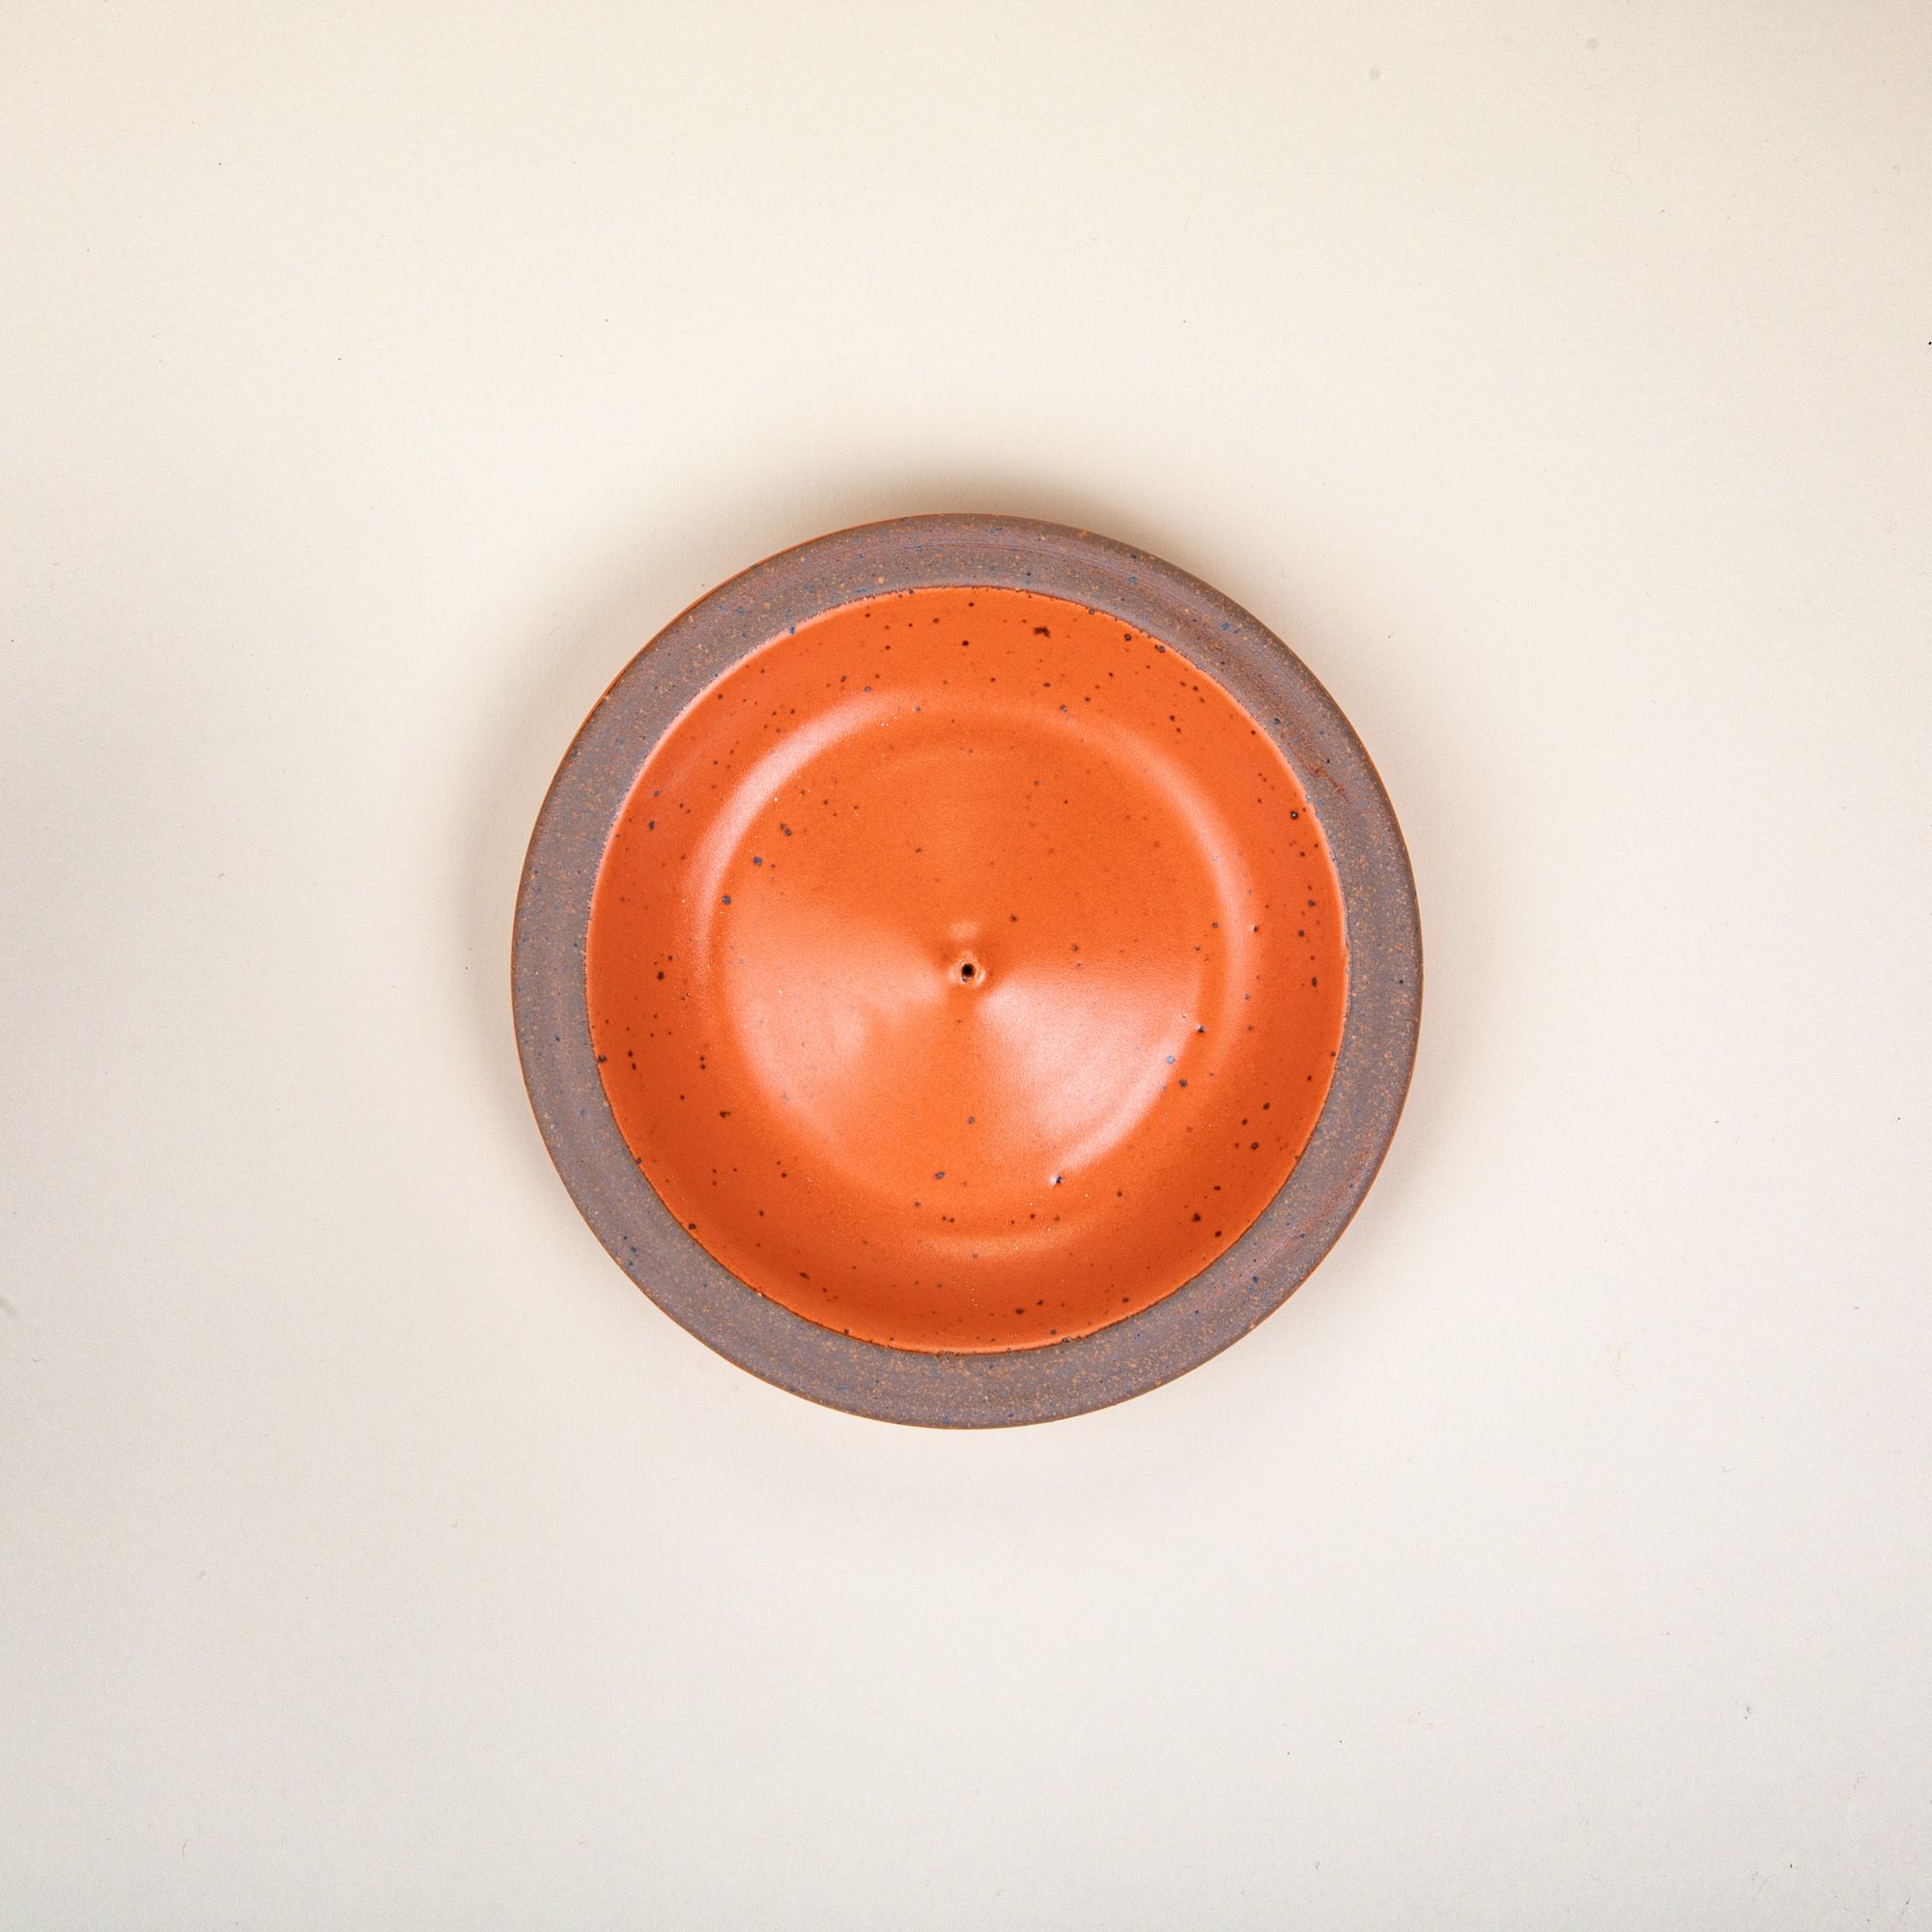 An overhead view of a ceramic plate-shaped incense stick holder with an unglazed rim and glazed in a bold orange color featuring lots of iron speckles.